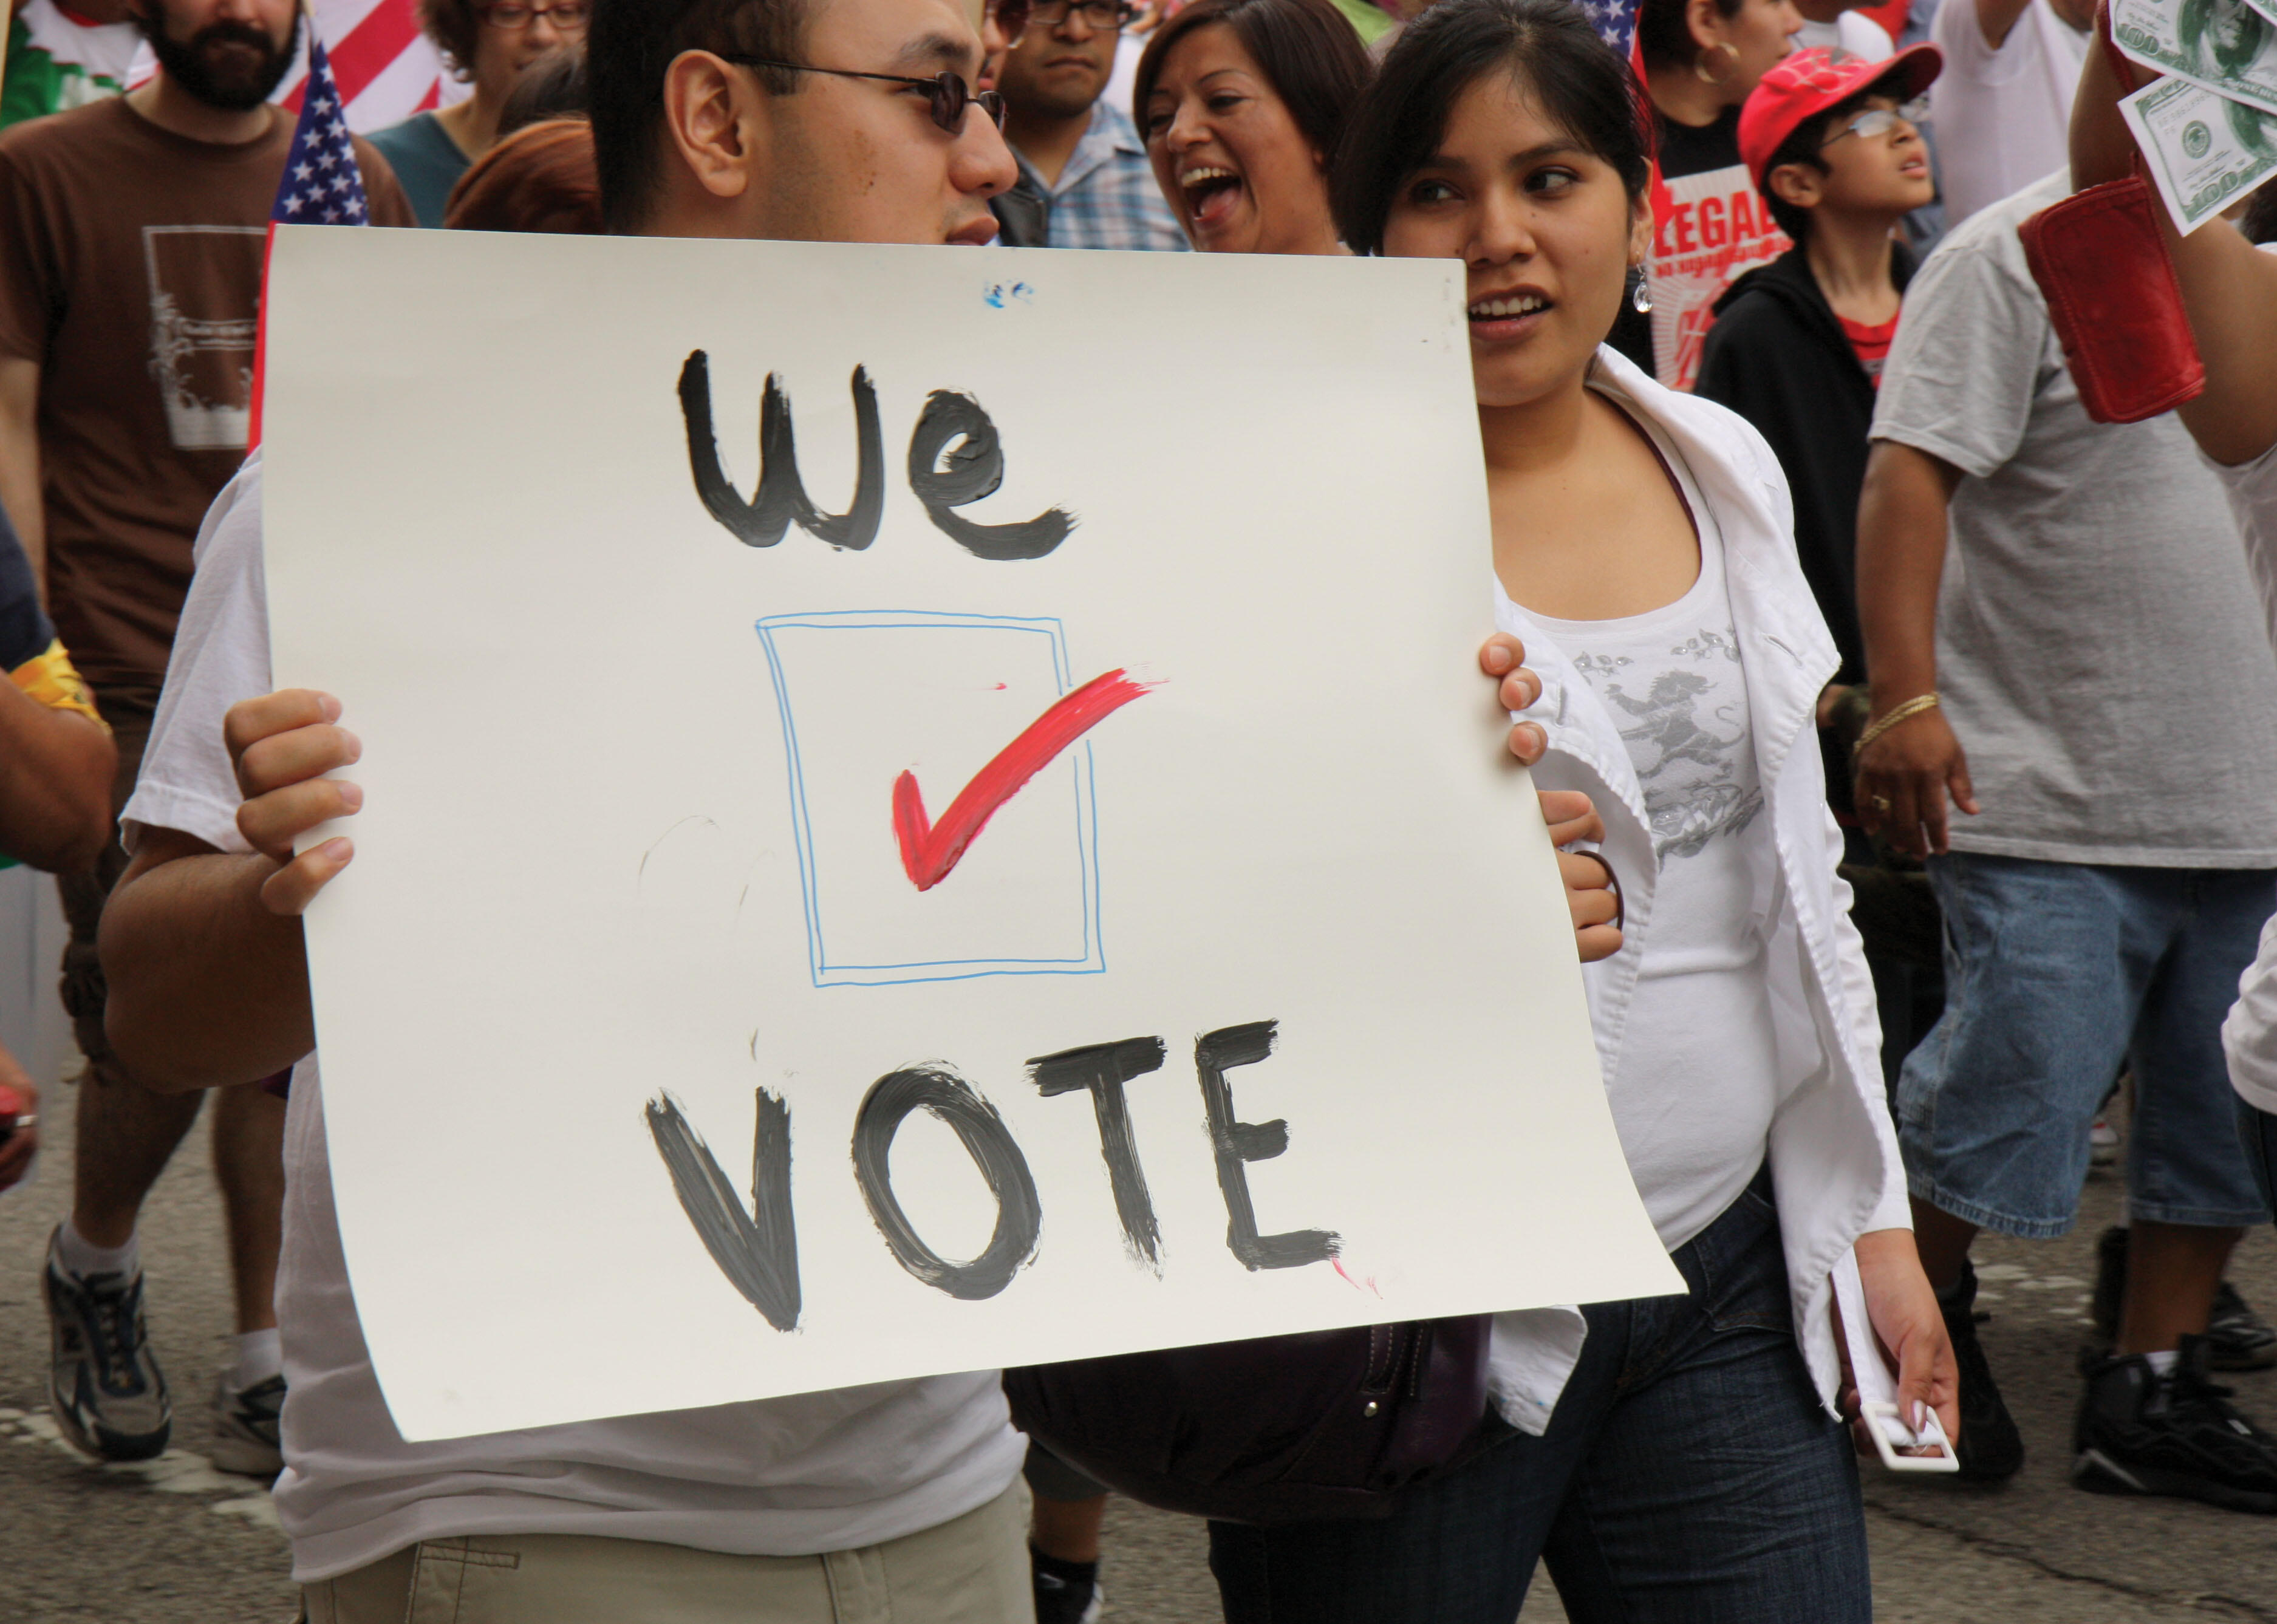 A demonstrator holds a sign reading "We vote" at a protest of Arizona’s Senate Bill 1070 in a May Day march in Chicago. (Photo by Carrie Sloan.)